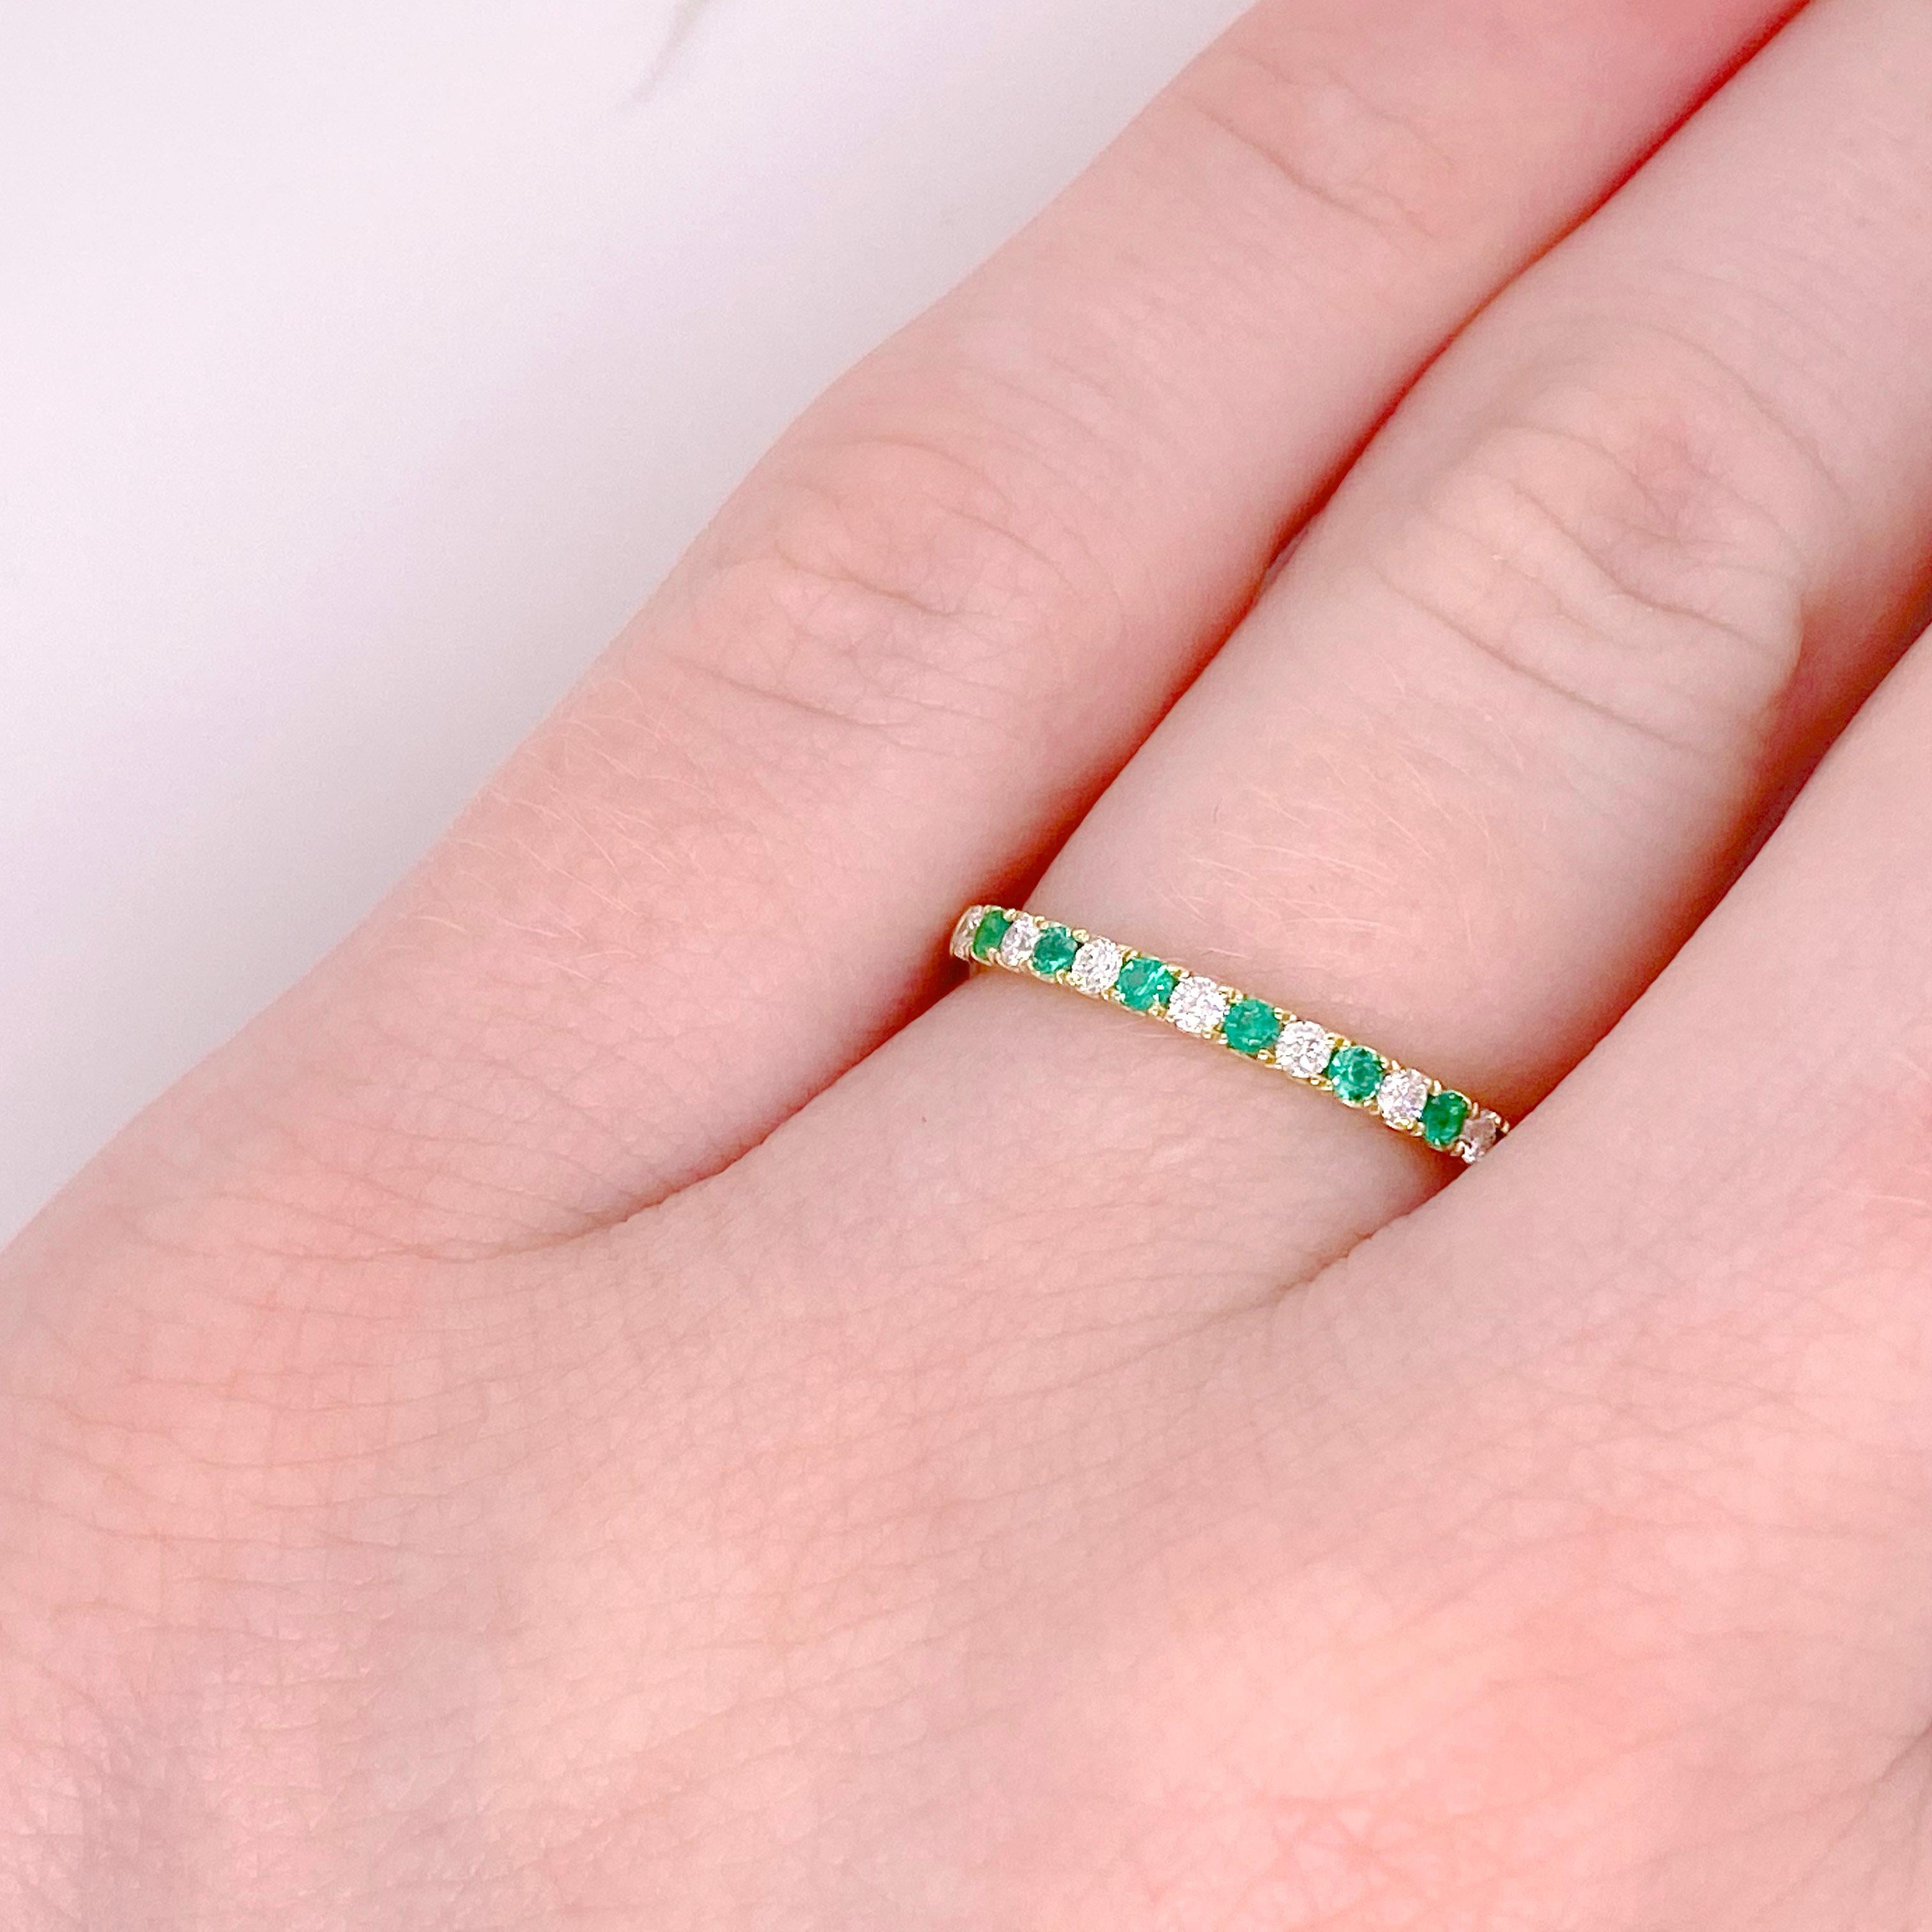 The green emerald and white diamond ring is a lovely band for a wedding band, anniversary band or a stackable band. The 14 karat yellow gold band is really excellent quality and is something that will be cherished forever. The details for this